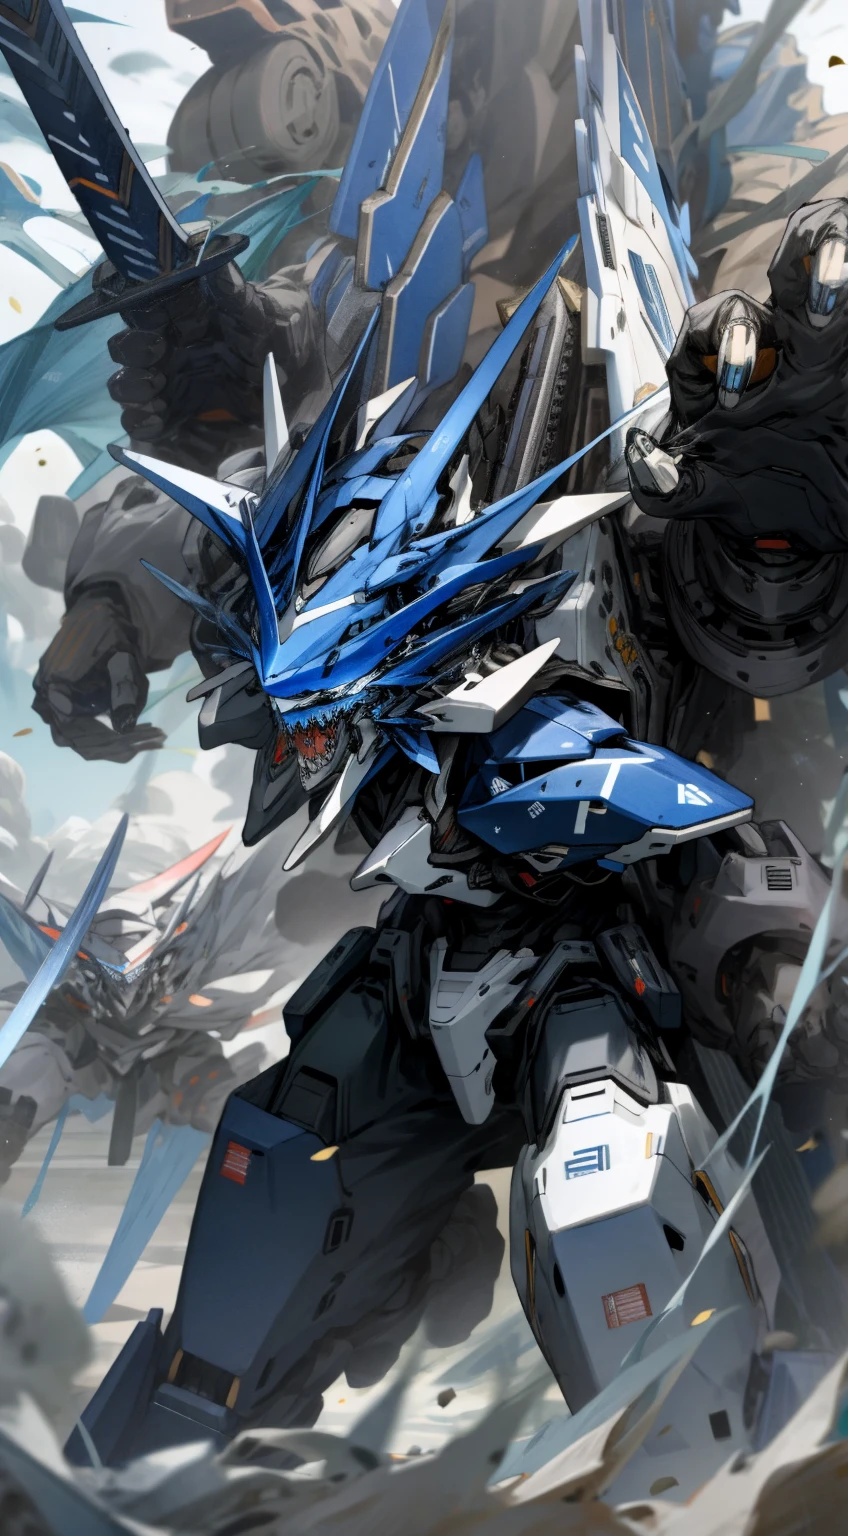 masterpiece, White and black mechs, Giant claws, Attack, Blue, Navy, holding sword